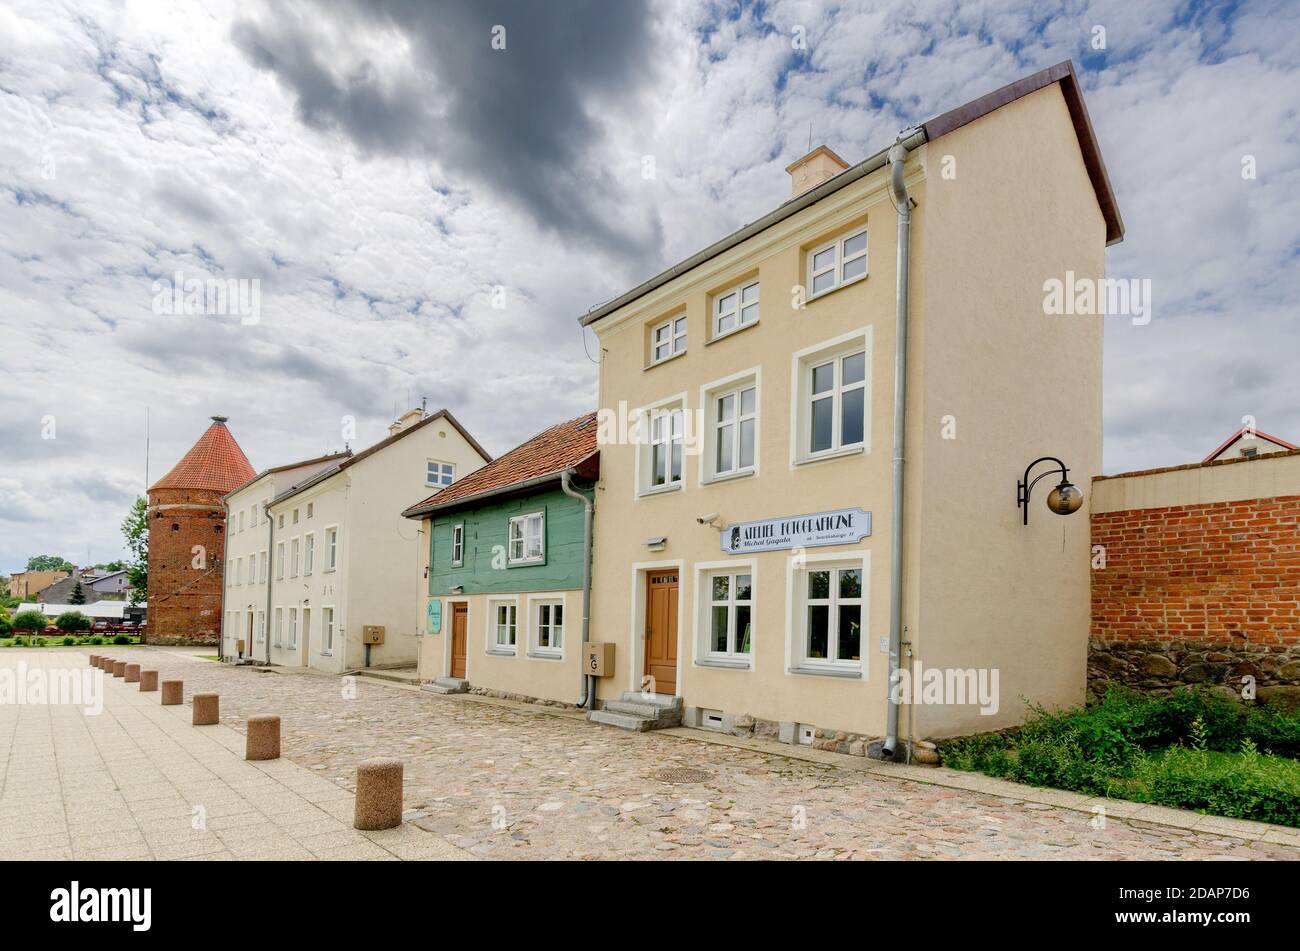 DOBRE MIASTO, WARMIAN-MAZURIAN PROVINCE, POLAND; ger. Guttstadt, Open-air city buildings museum - 'Museum by the Tower', 17th cent. houses complex. Stock Photo